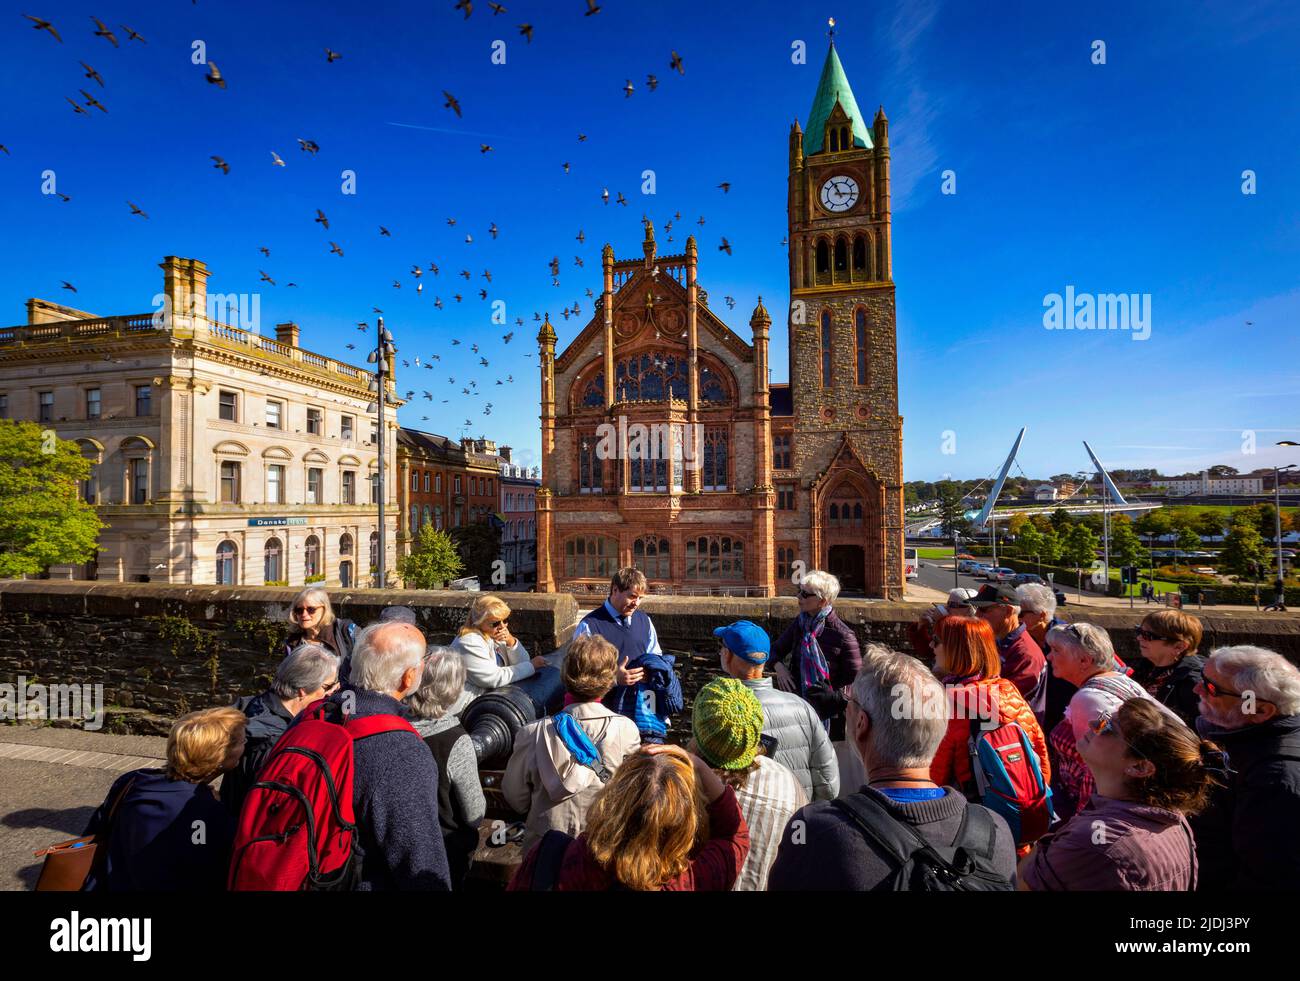 Tourists on Derry's City Walls in front of the Guildhall, Derry City, Northern Ireland Stock Photo